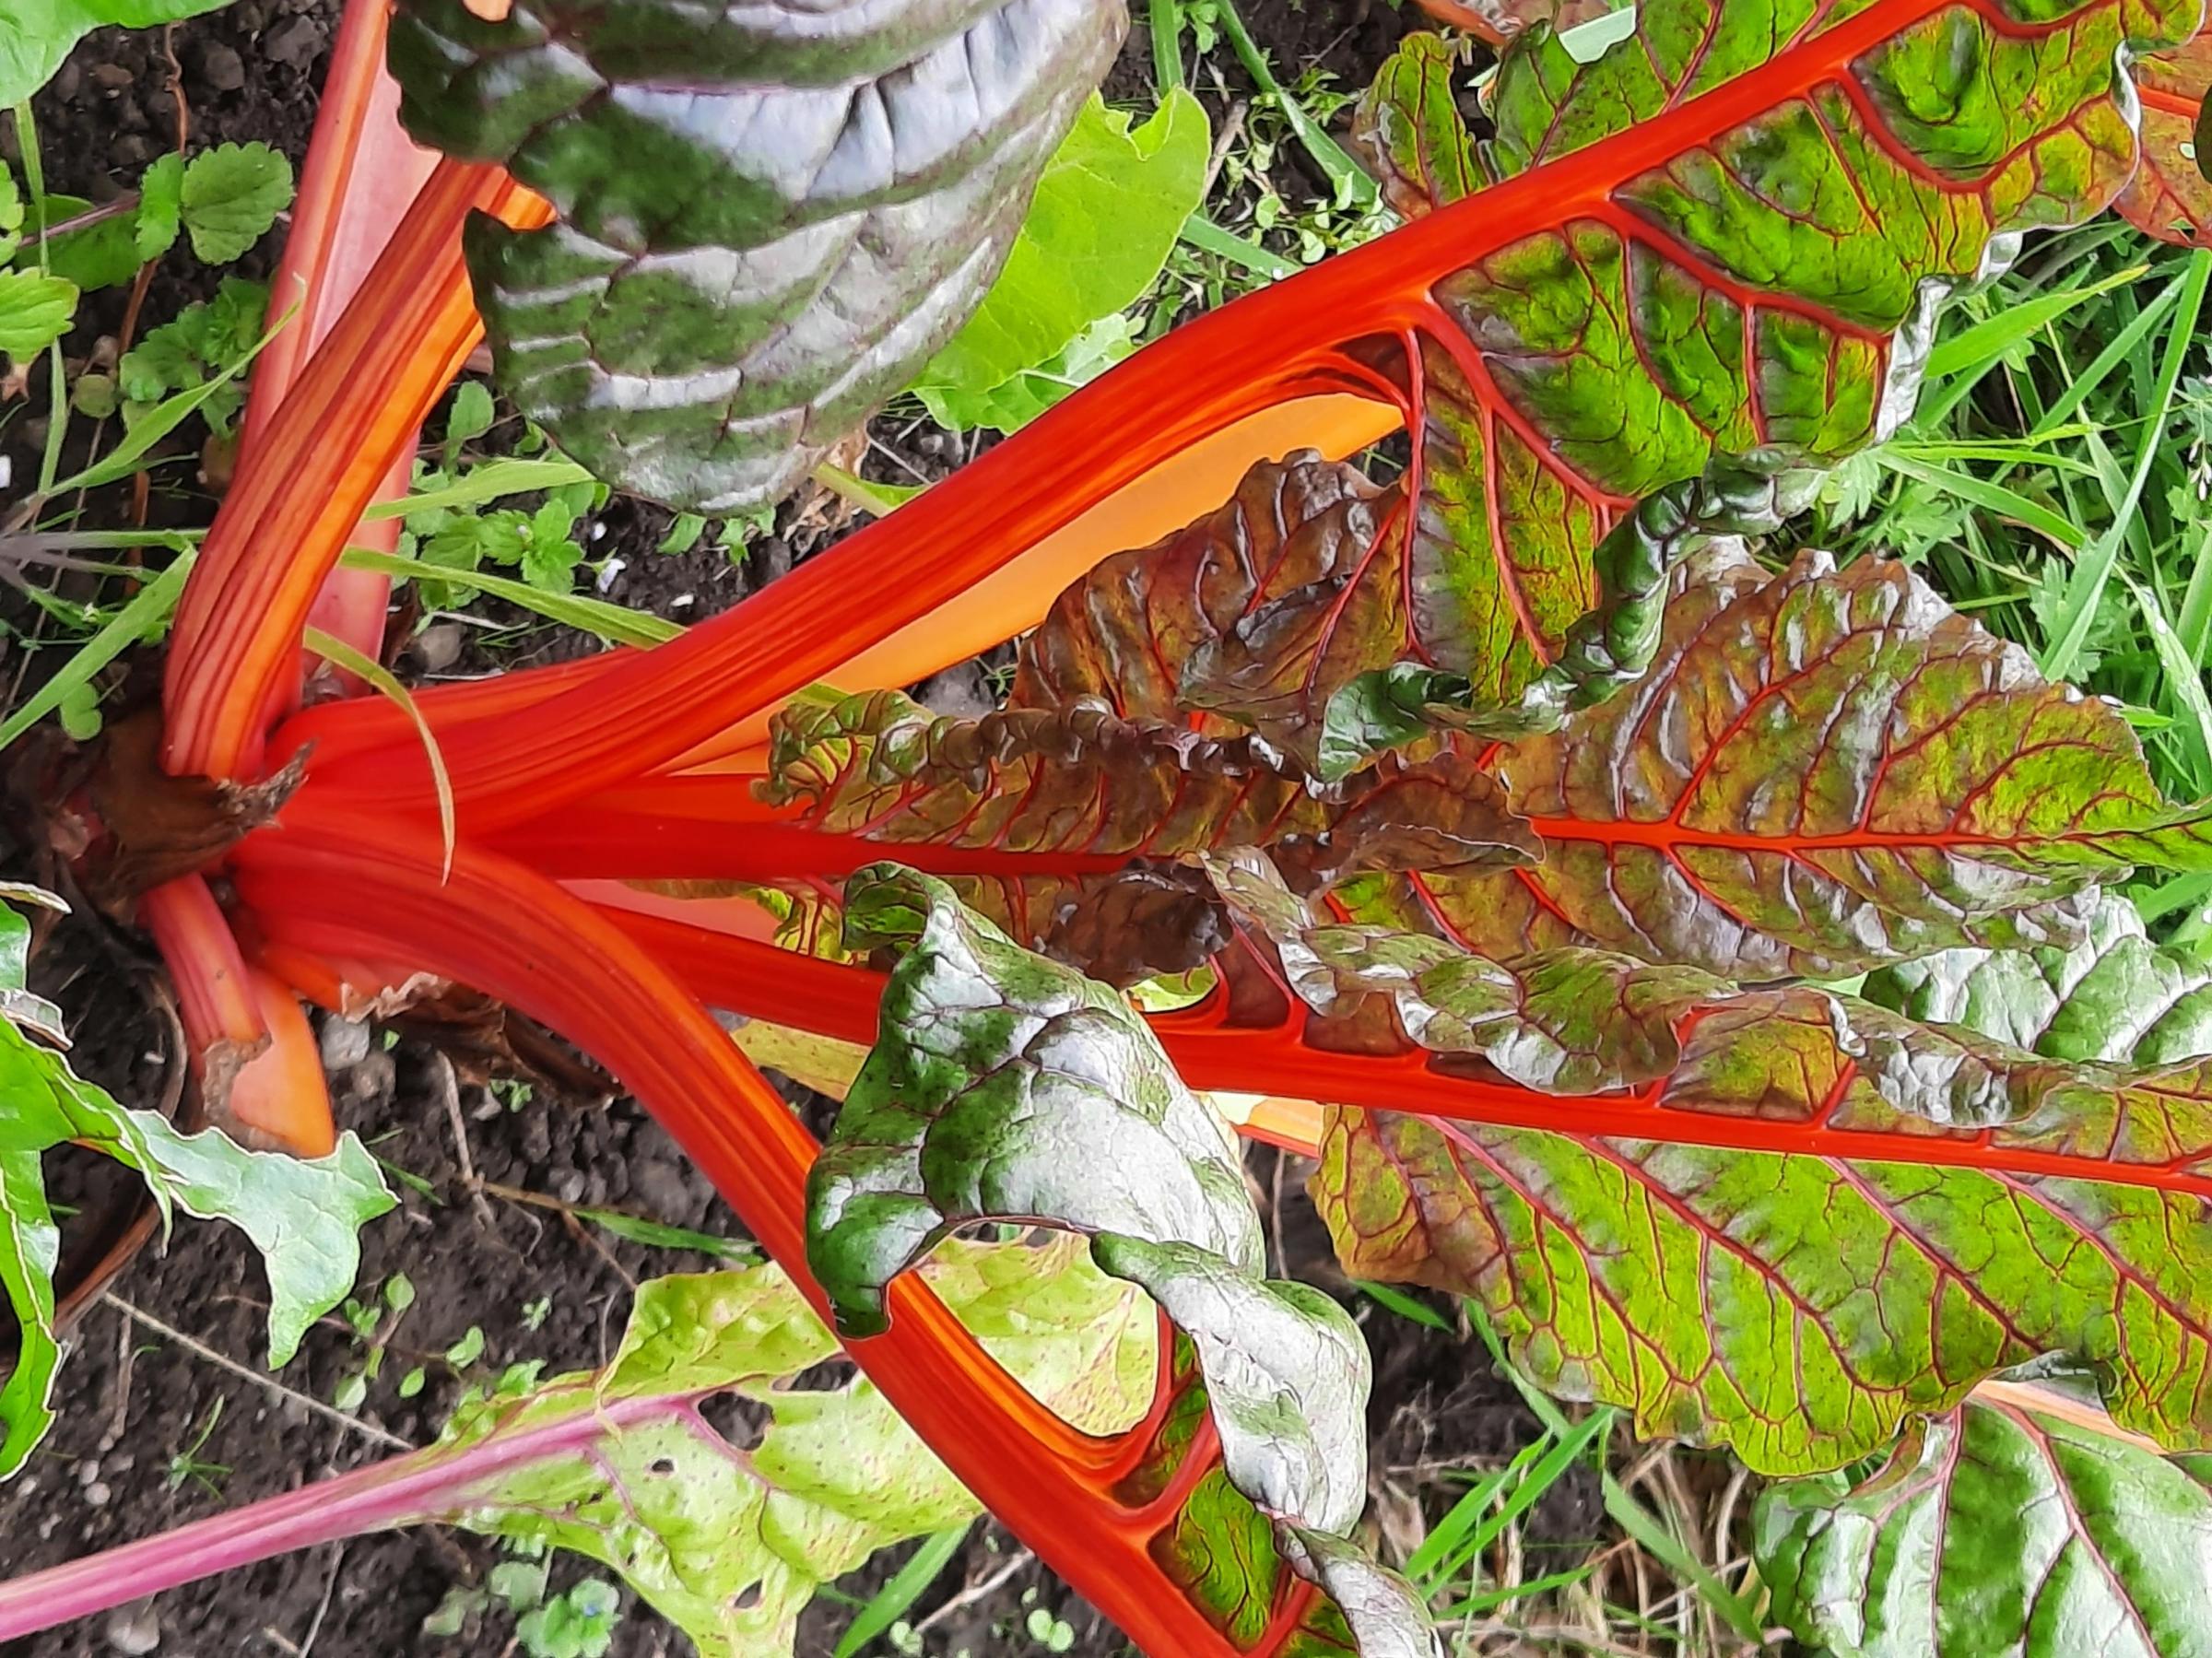 Swiss Chard has performed really well this summer and is ideal for cooking and even salads